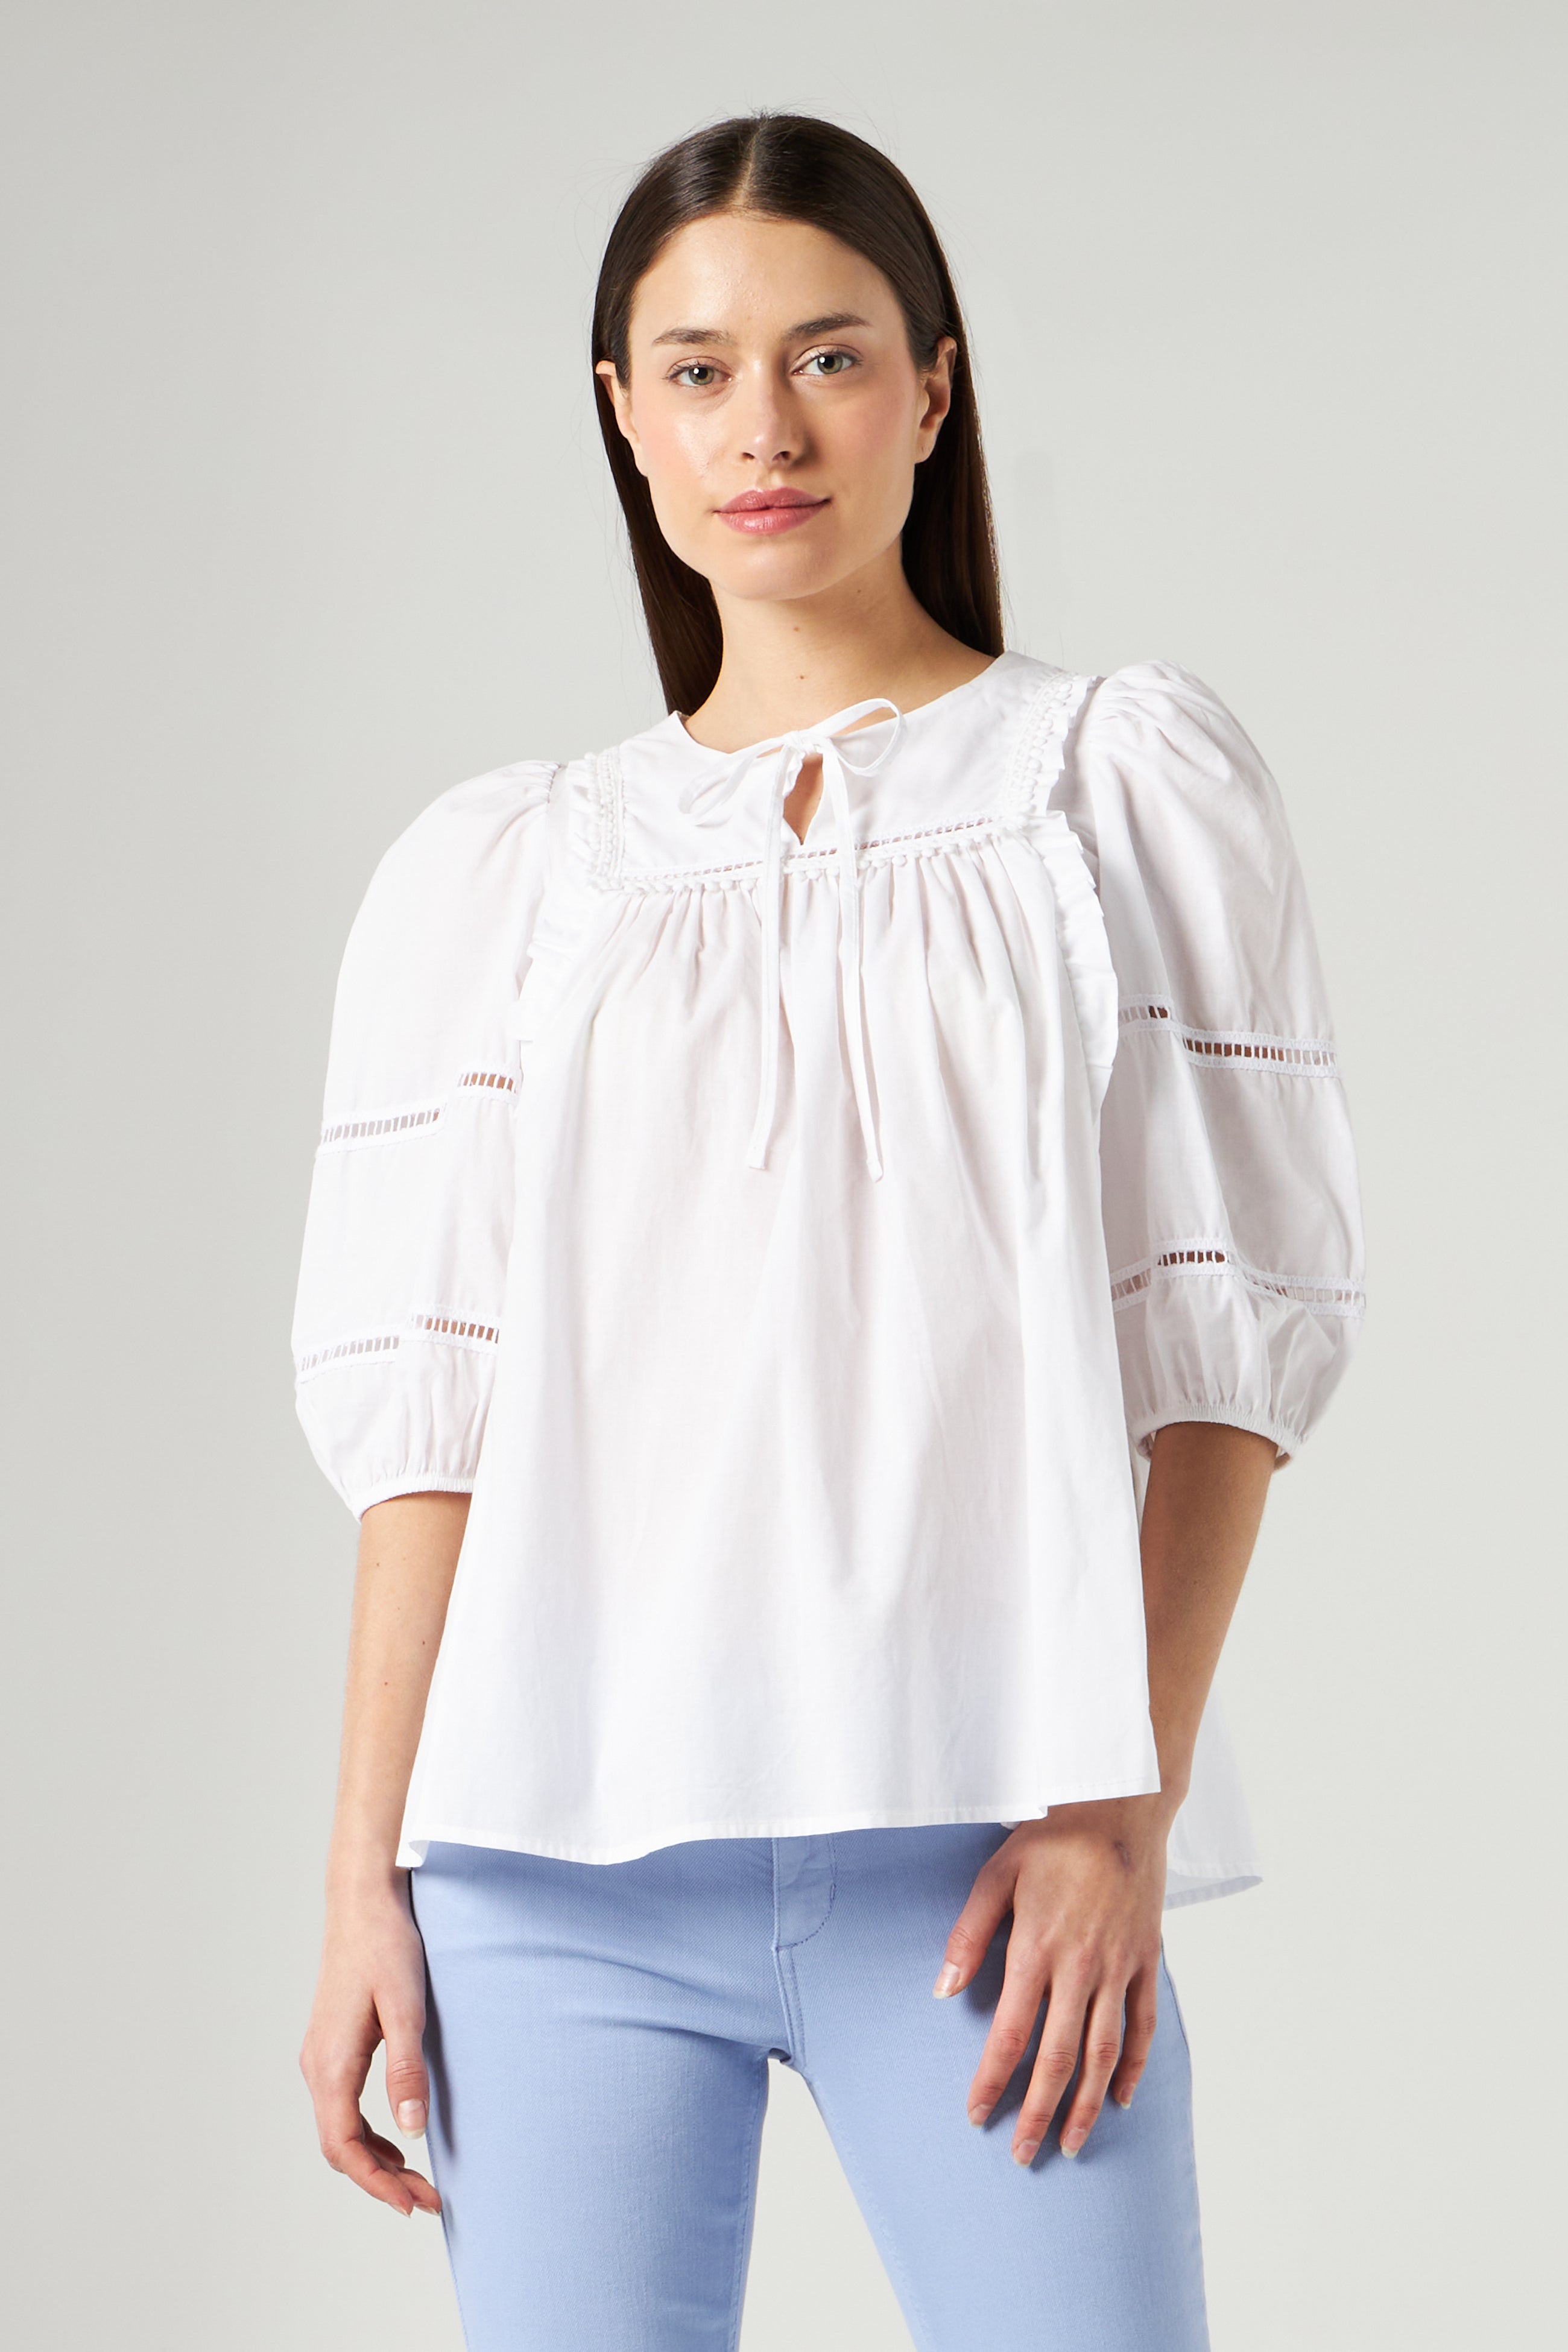 LIU JO Blouse with Puff Sleeves